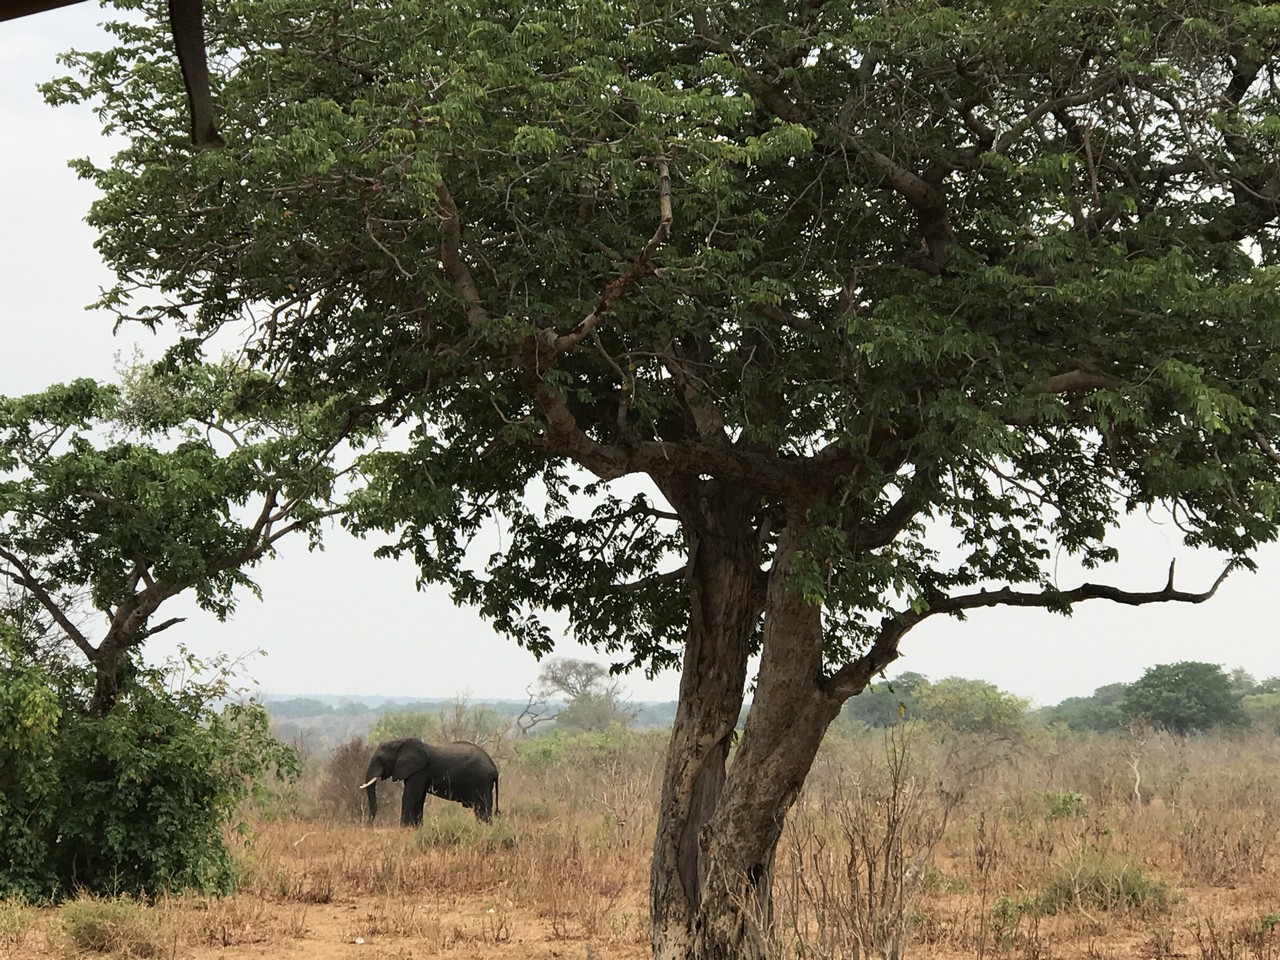 an elephant standing in a field under a tree